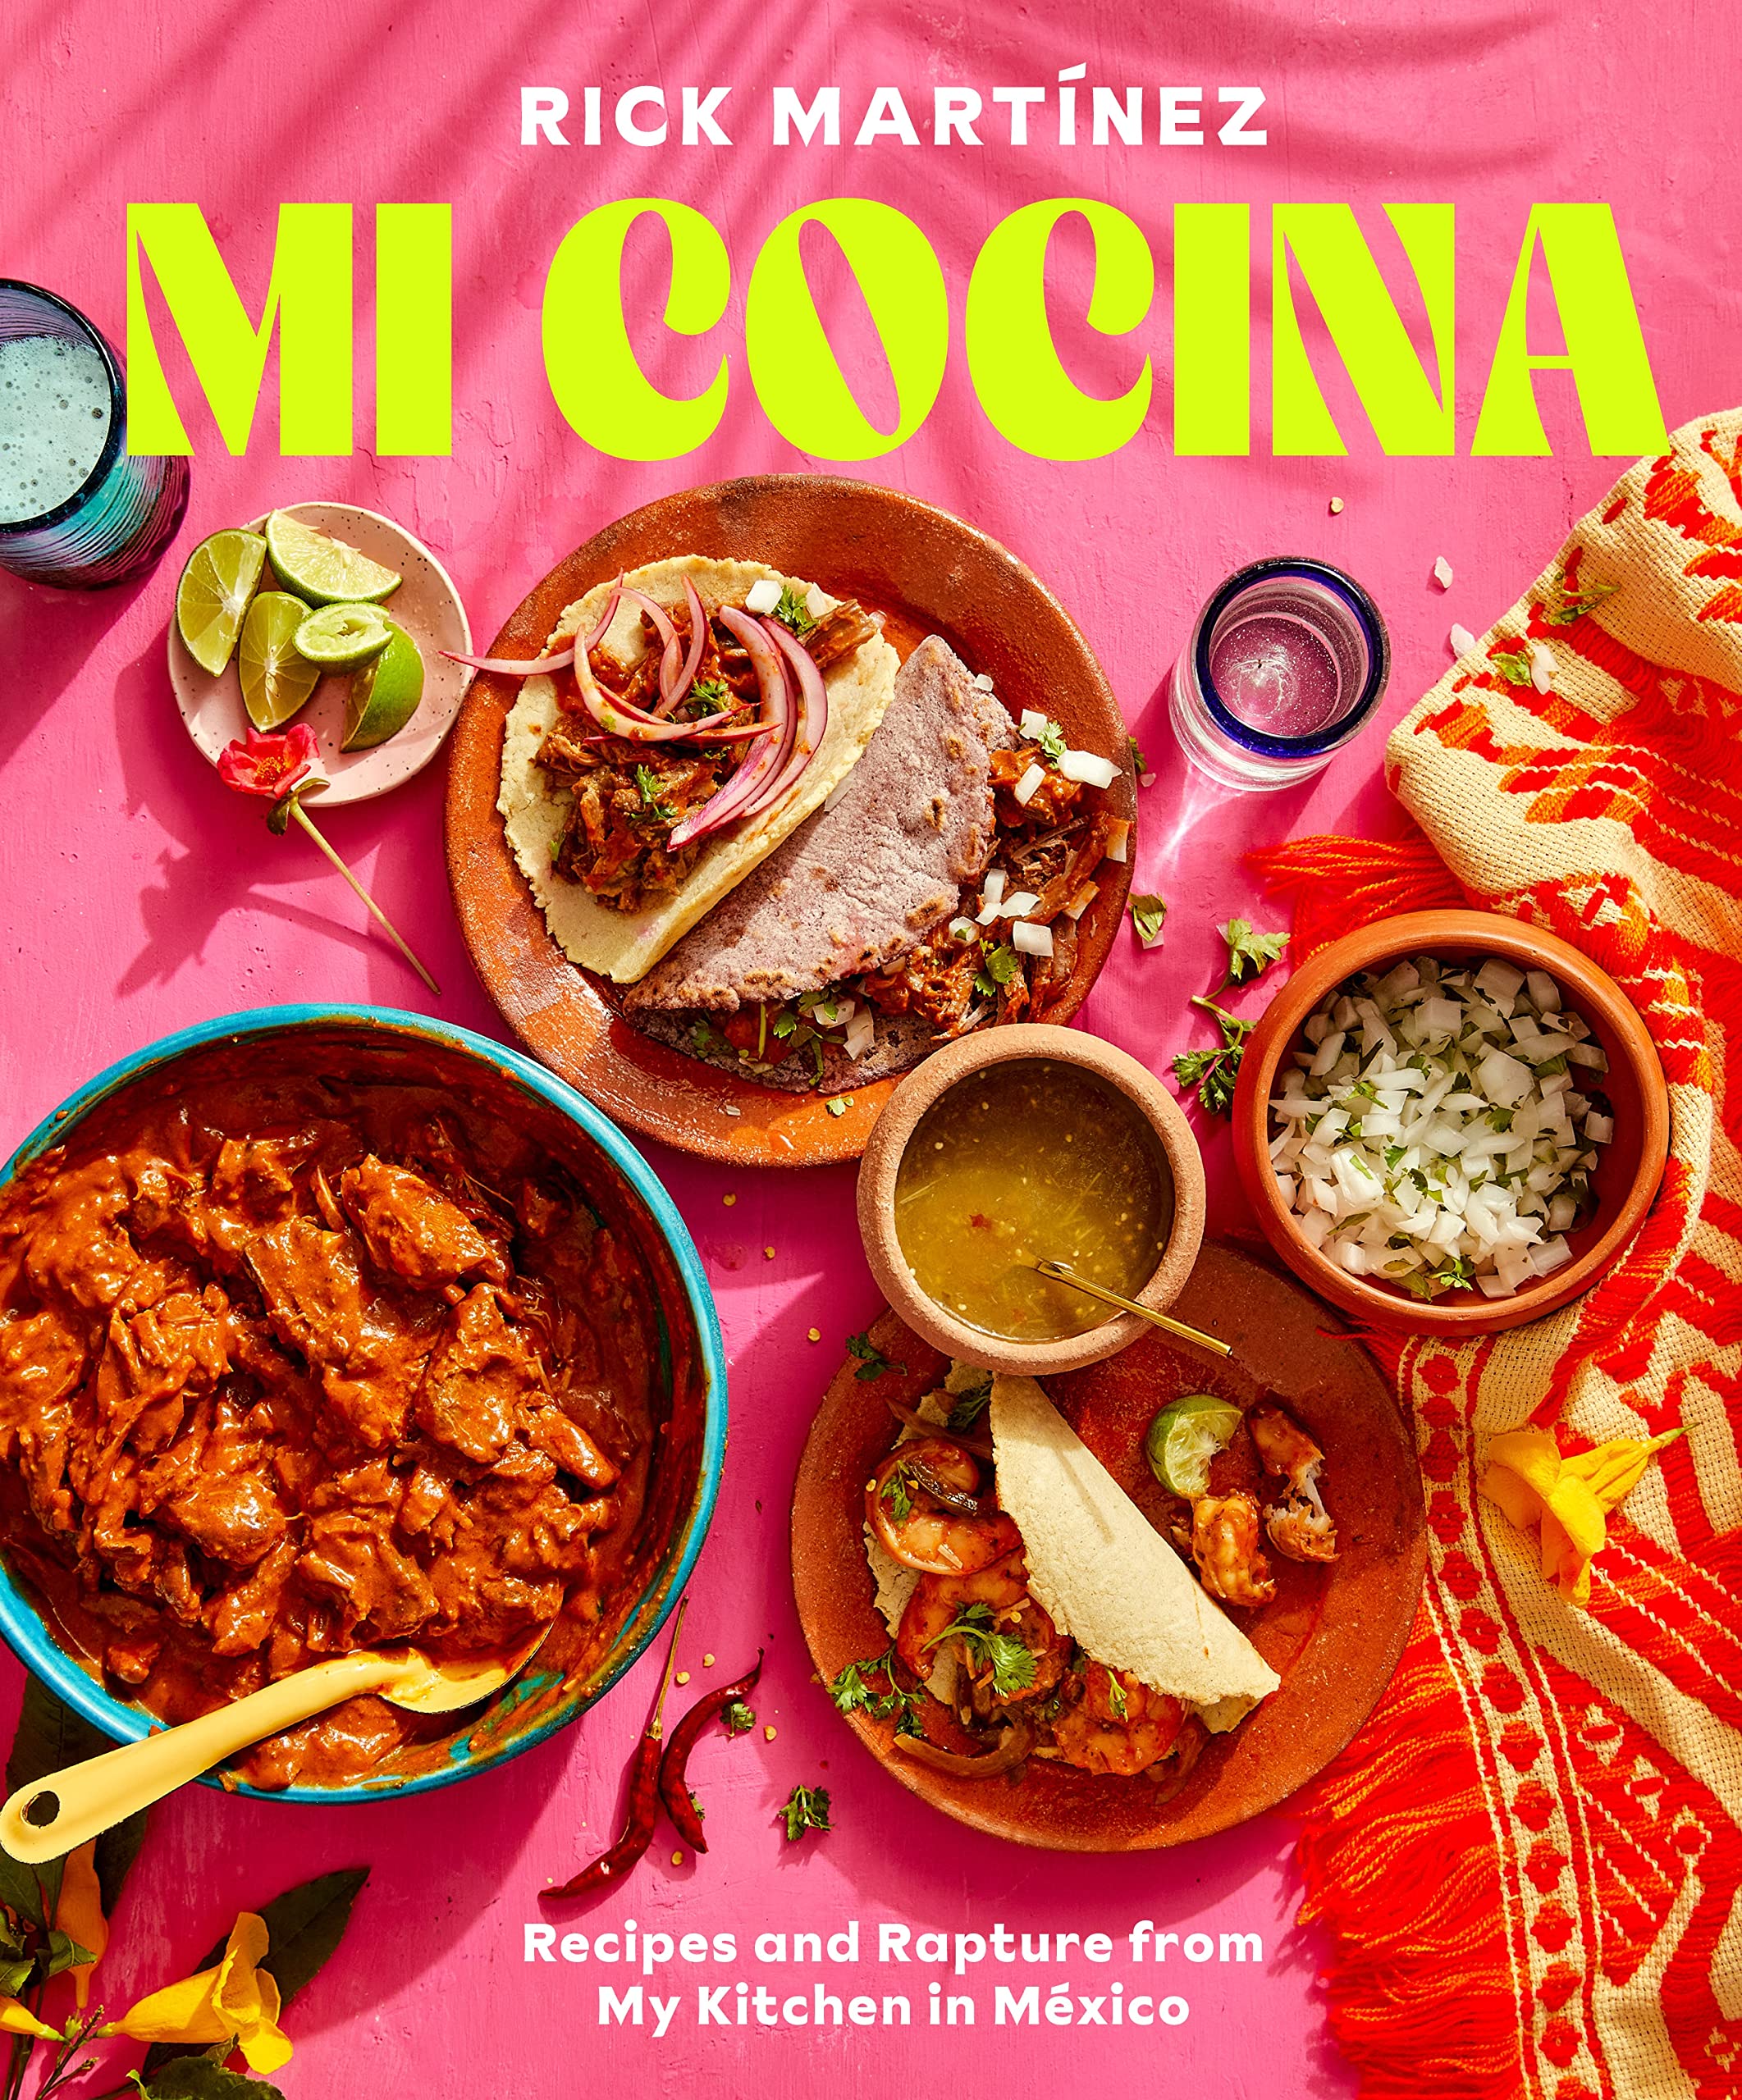 Mi Cocina: Recipes and Rapture from My Kitchen in Mexico (Rick Martínez)